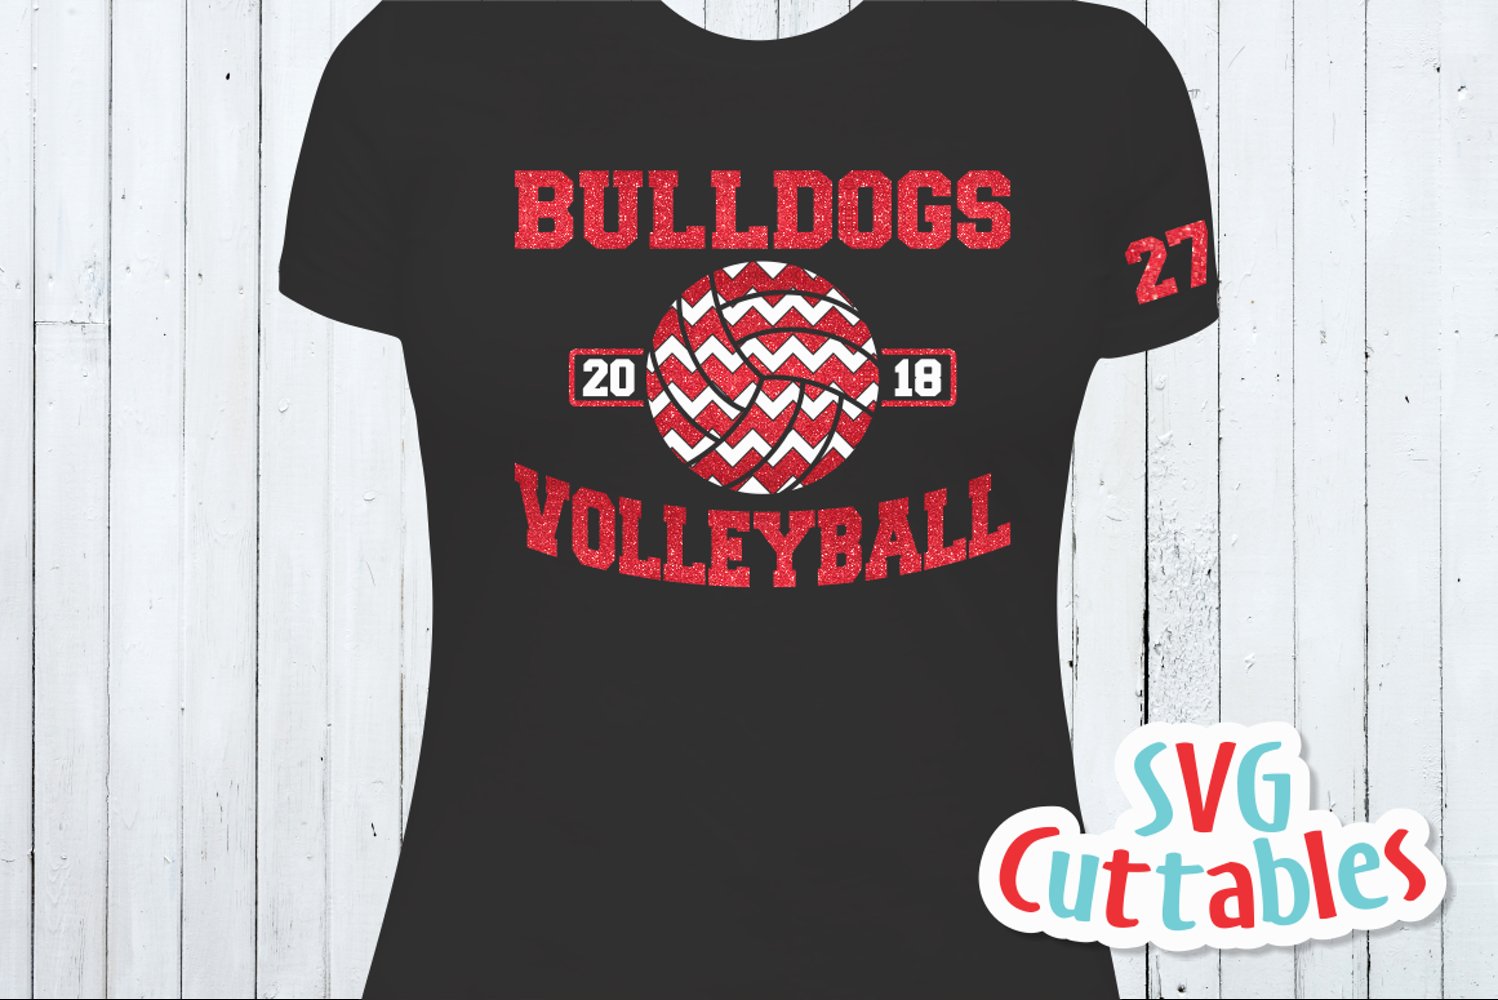 T-shirt design for volleyball team.